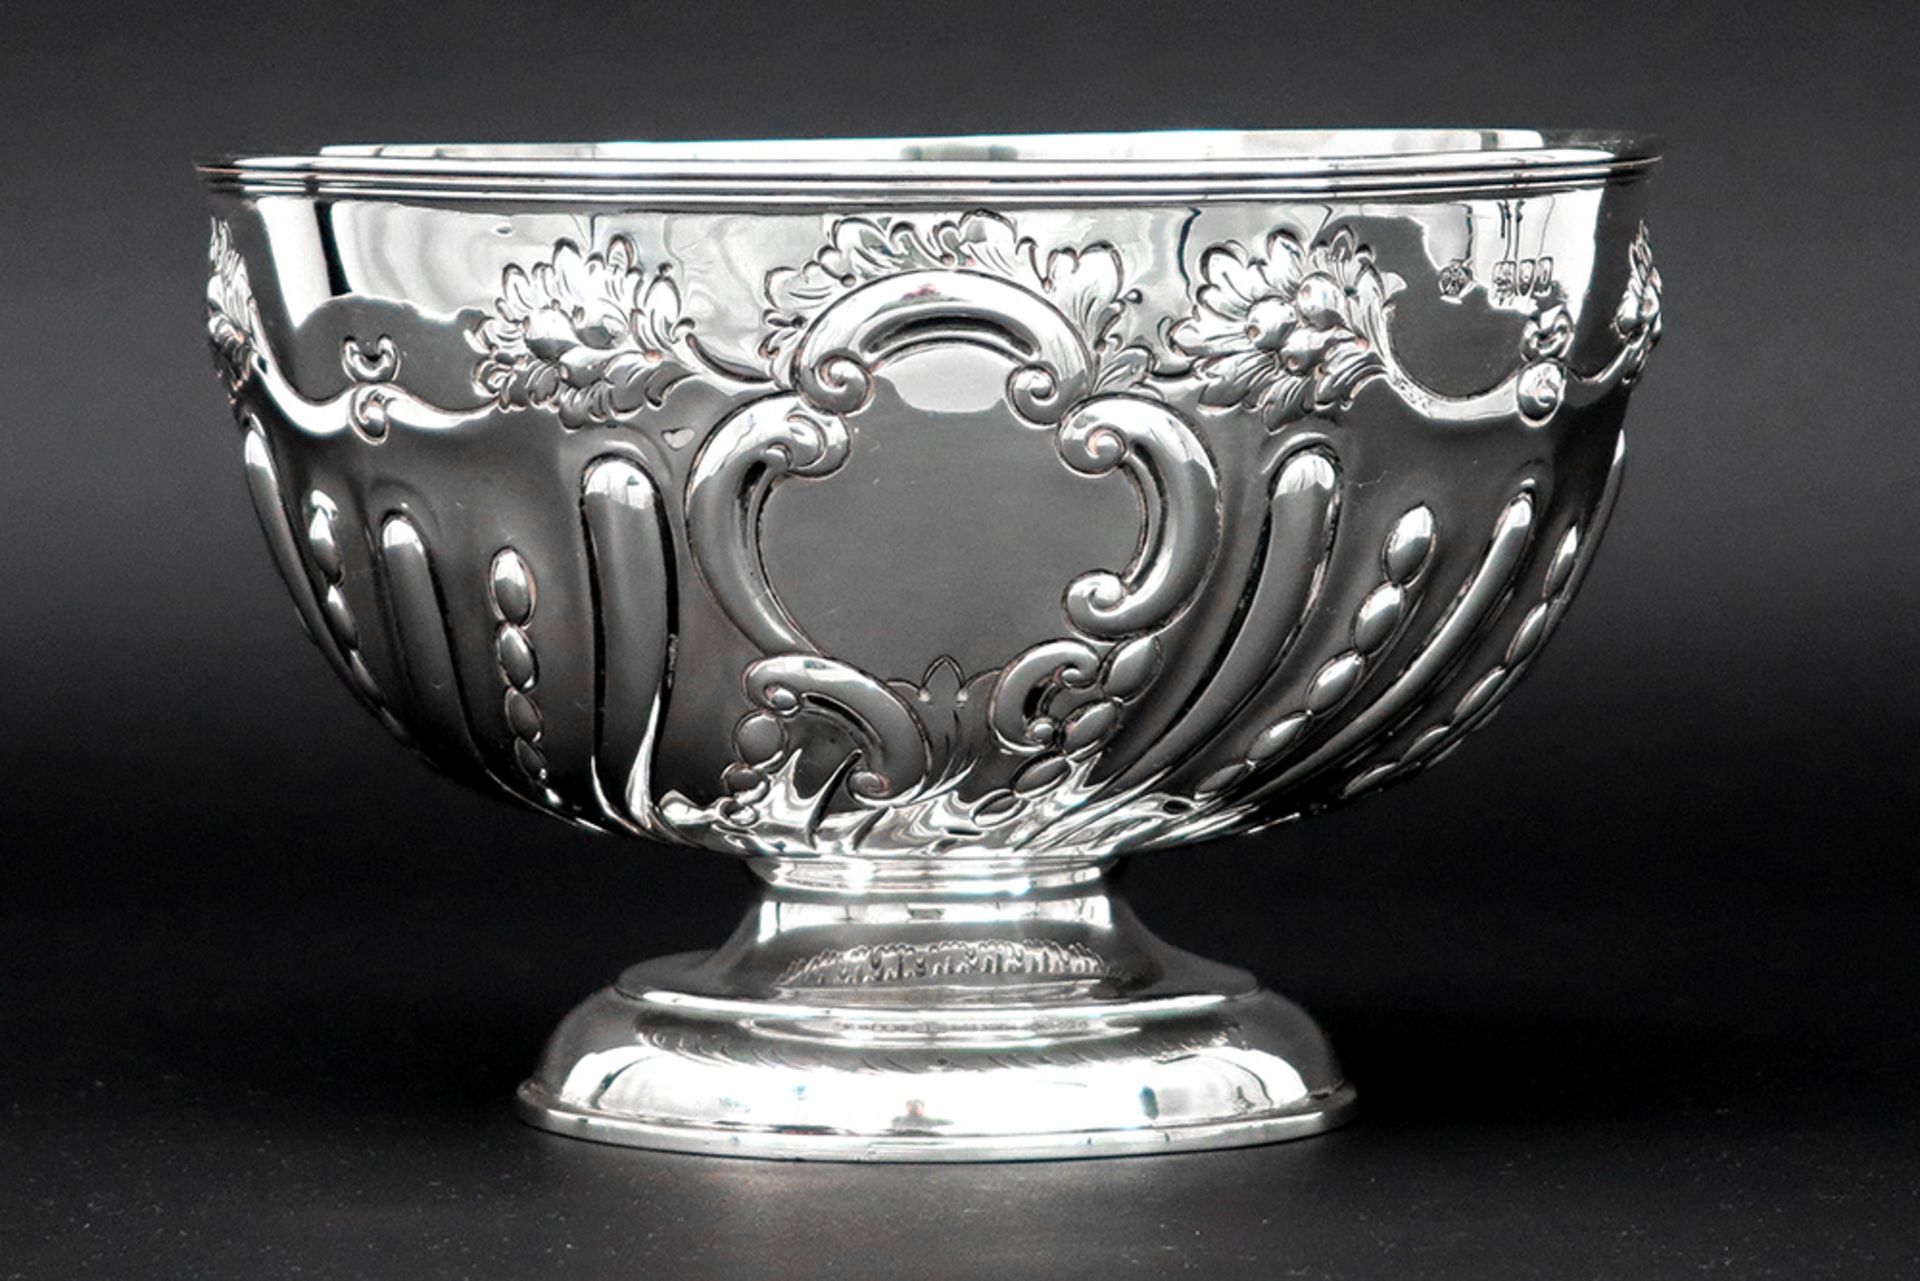 antique English "William Hutton & Sons LTD" signed bowl in signed and marked silver || WILLIAM